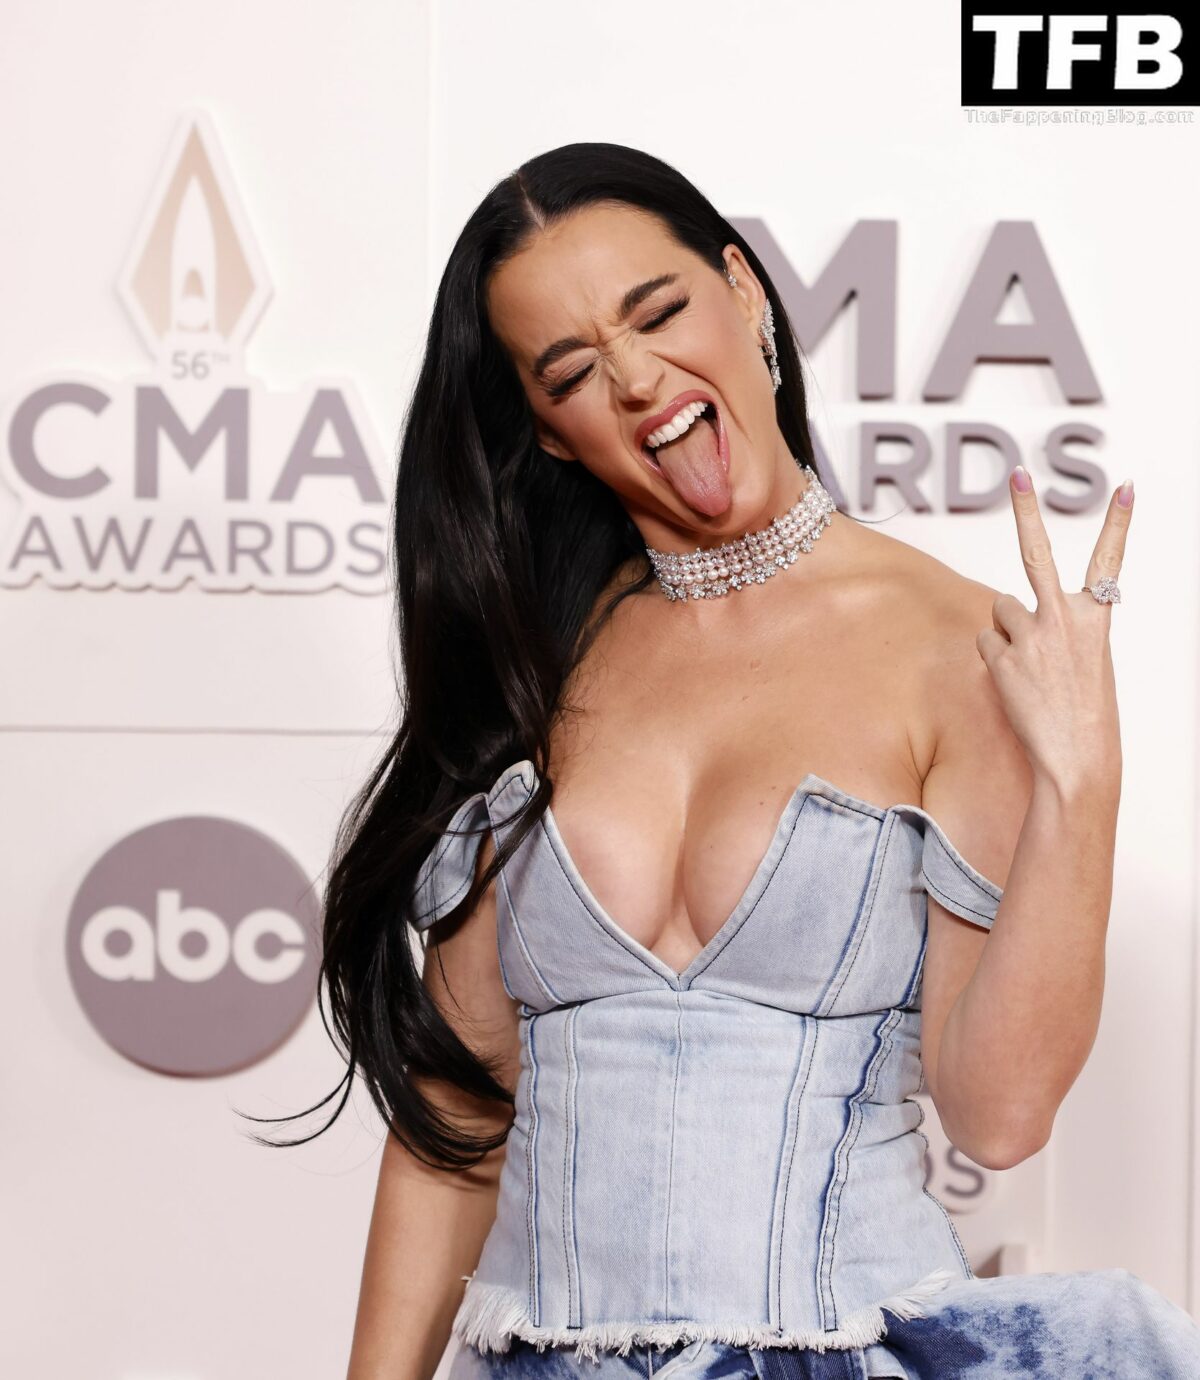 Katy Perry Sexy The Fappening Blog 1 1200x1380 - Katy Perry Shows Off Her Sexy Boobs at the 56th Annual CMA Awards (27 Photos)